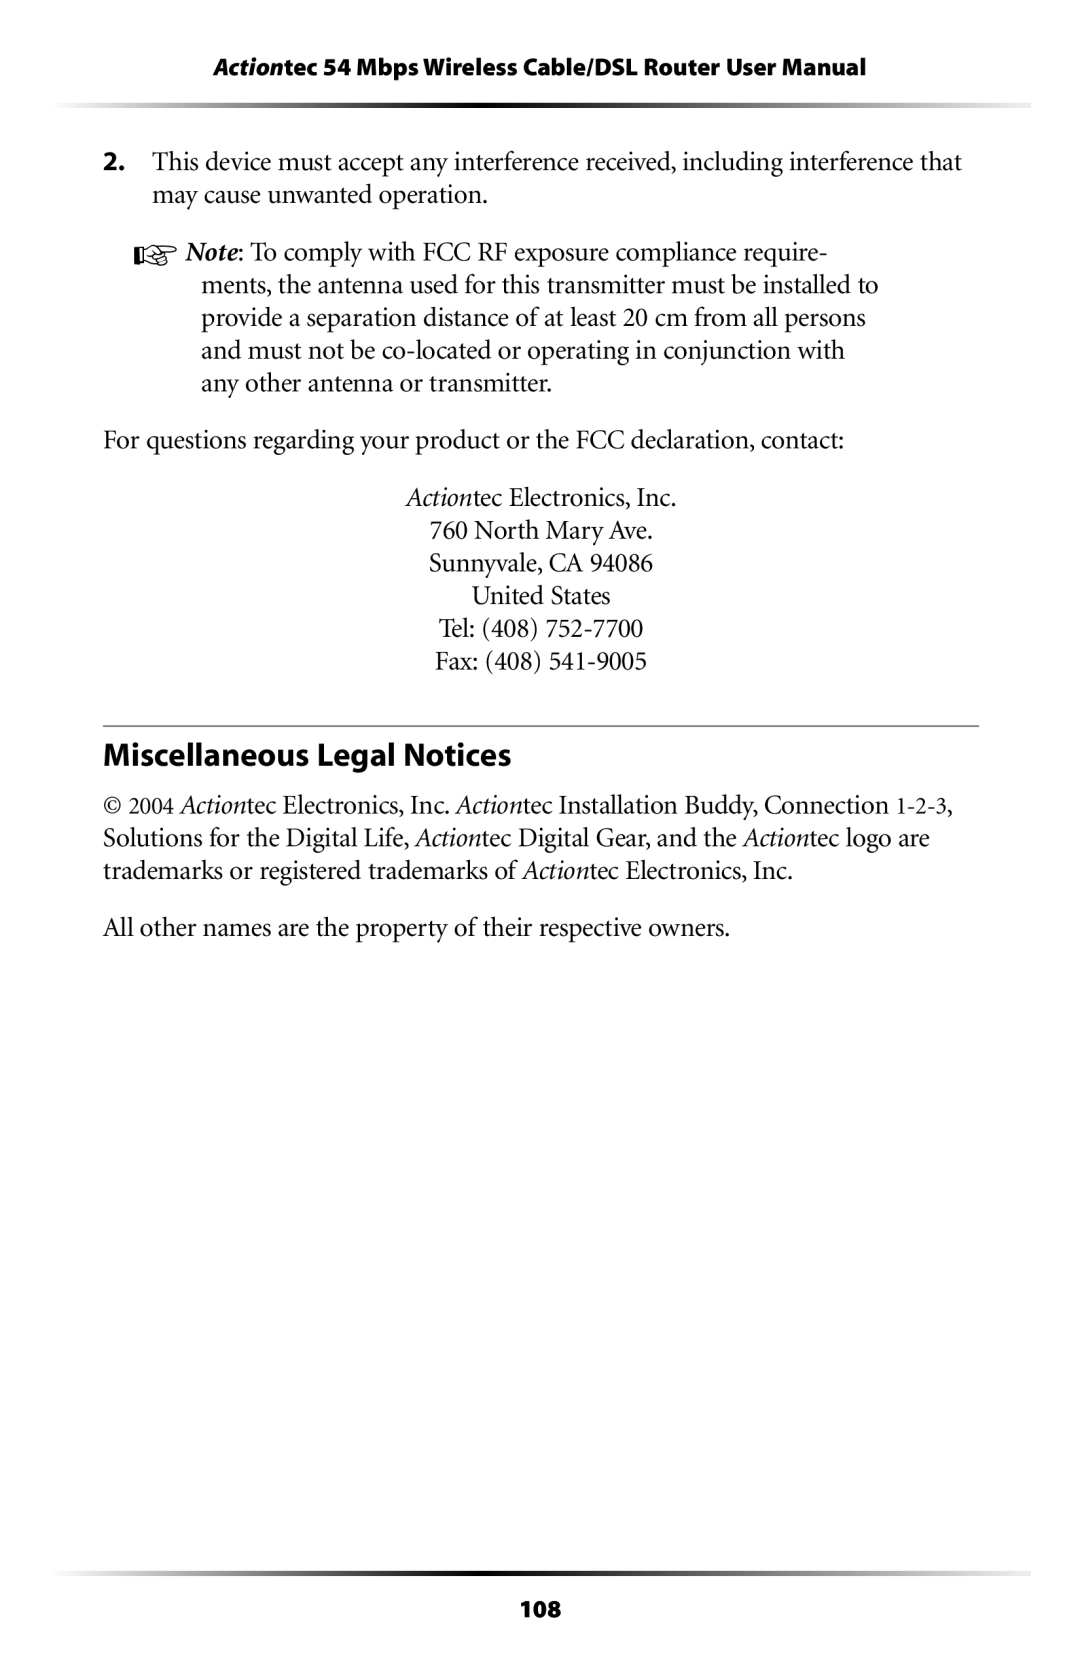 Actiontec electronic GT704WR user manual Miscellaneous Legal Notices 